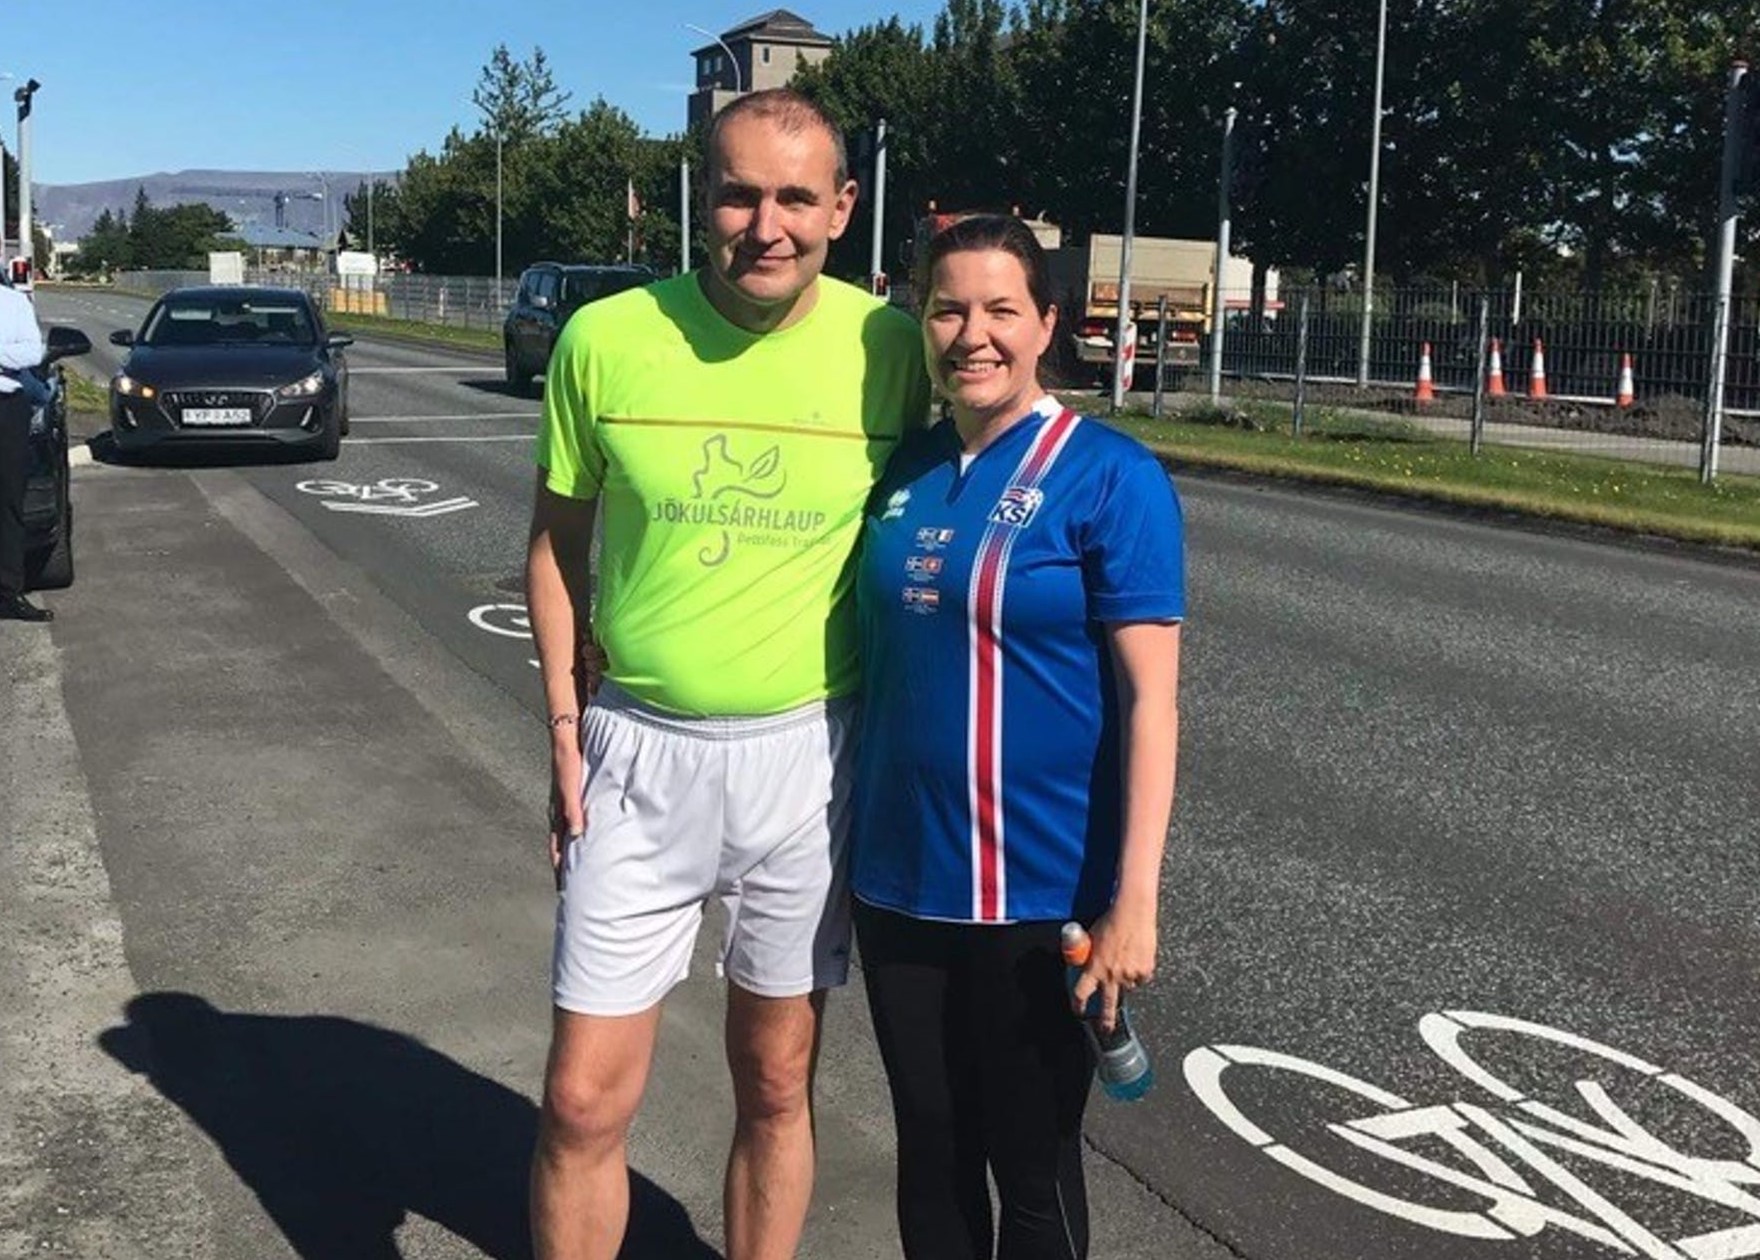 The Icelandic president ran for charity